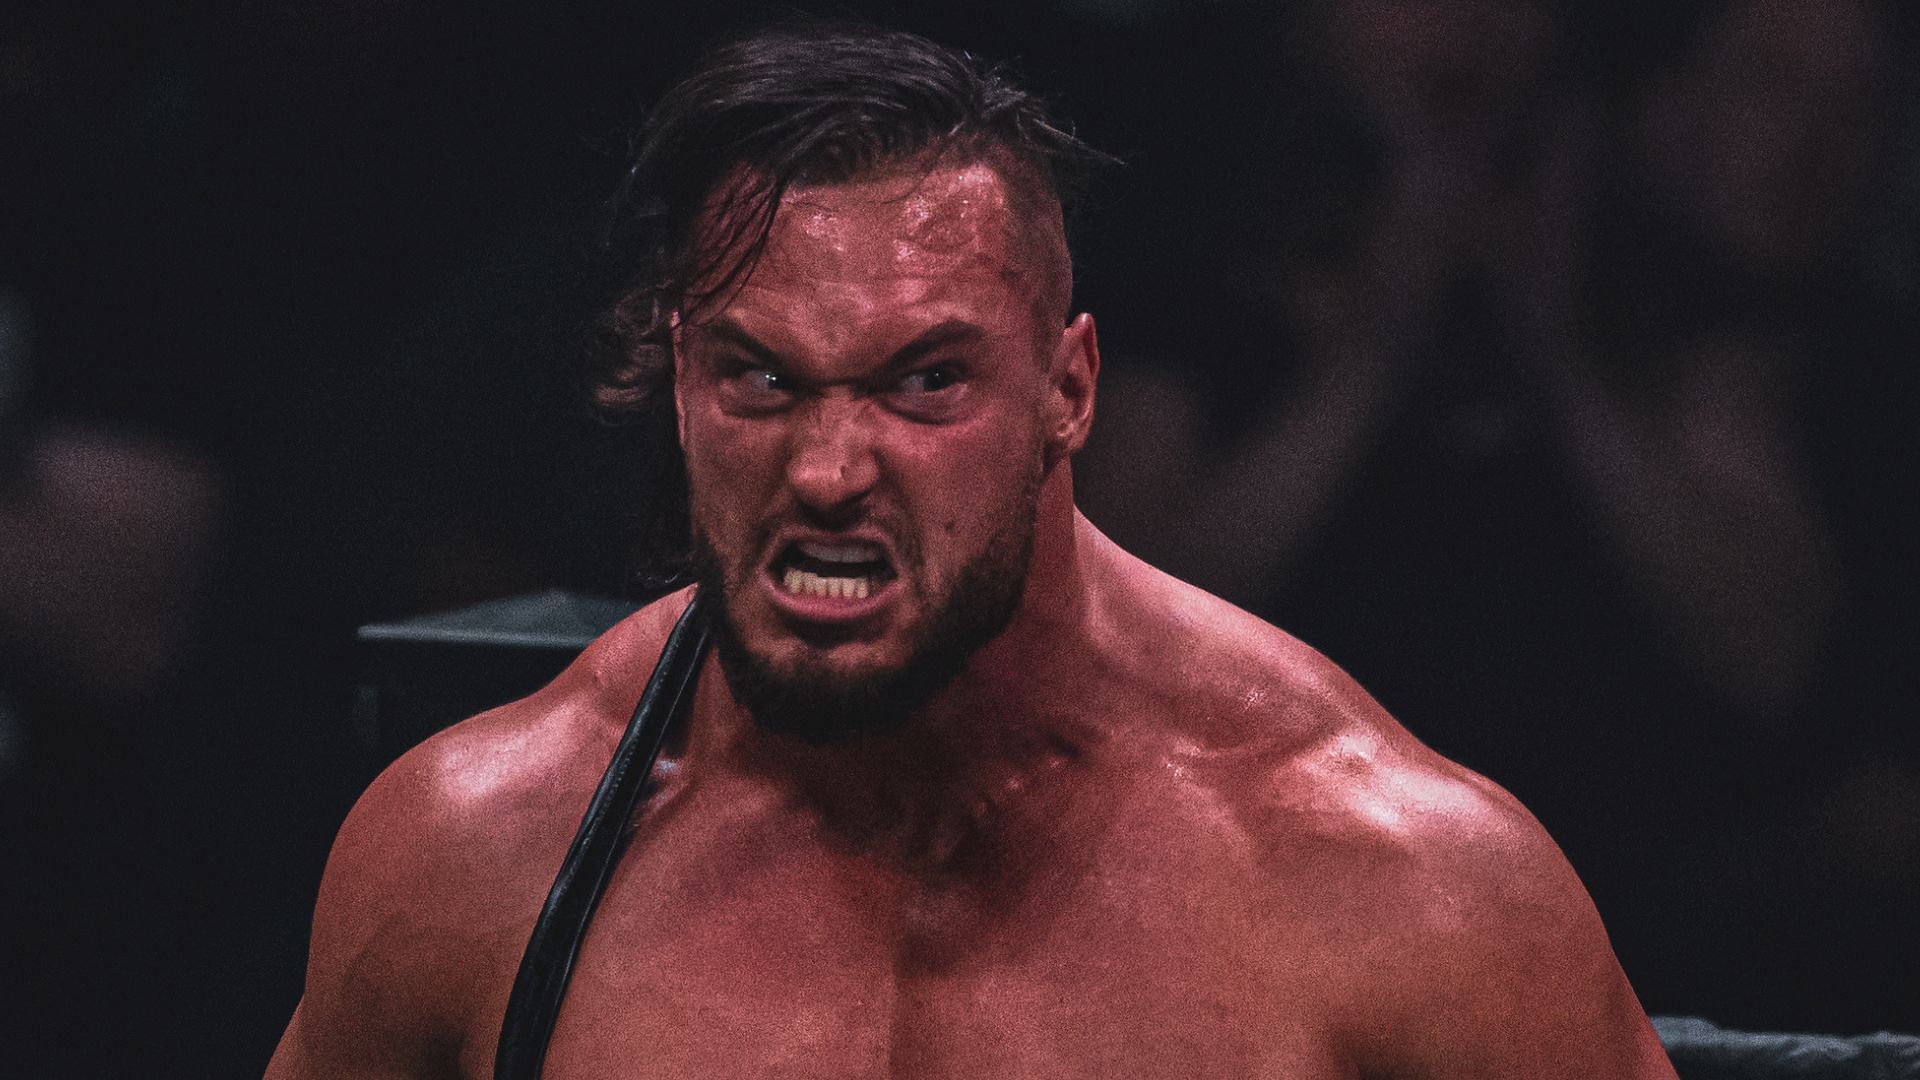 Wardlow at an AEW Dynamite event in 2022 (credit: Jay Lee Photography)